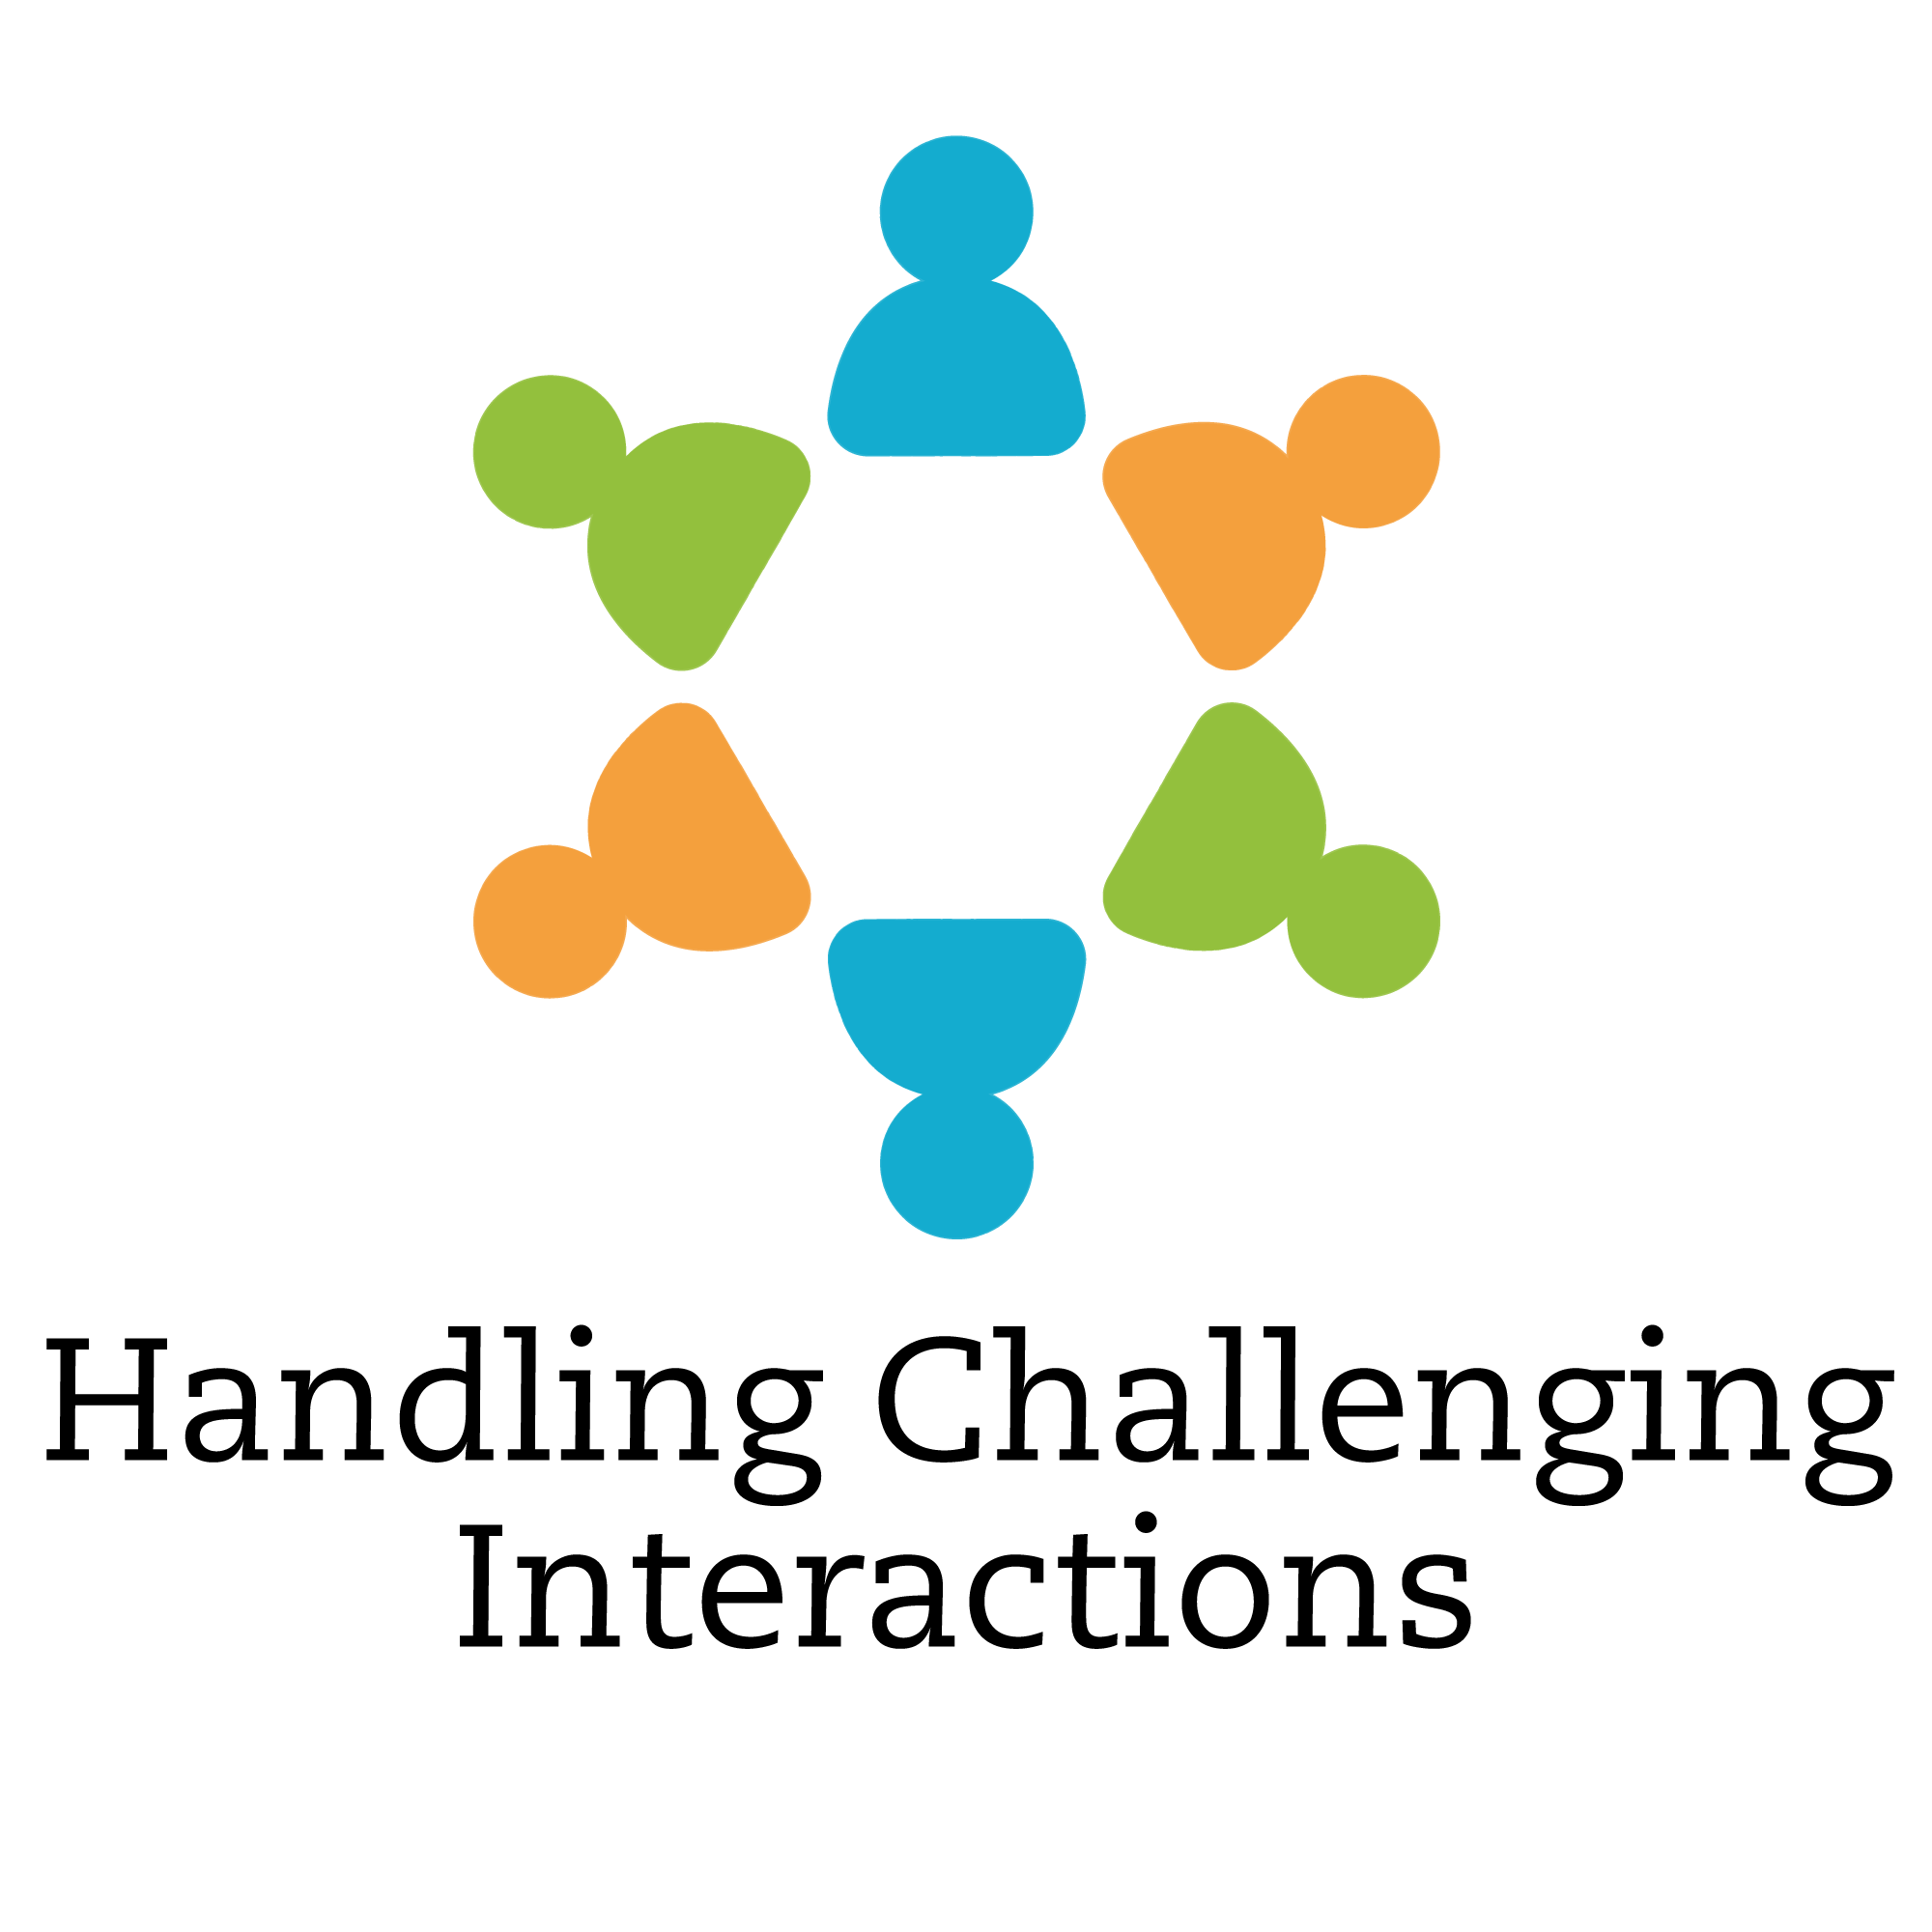 Handling challenging interactions with confidence (18 Mar)